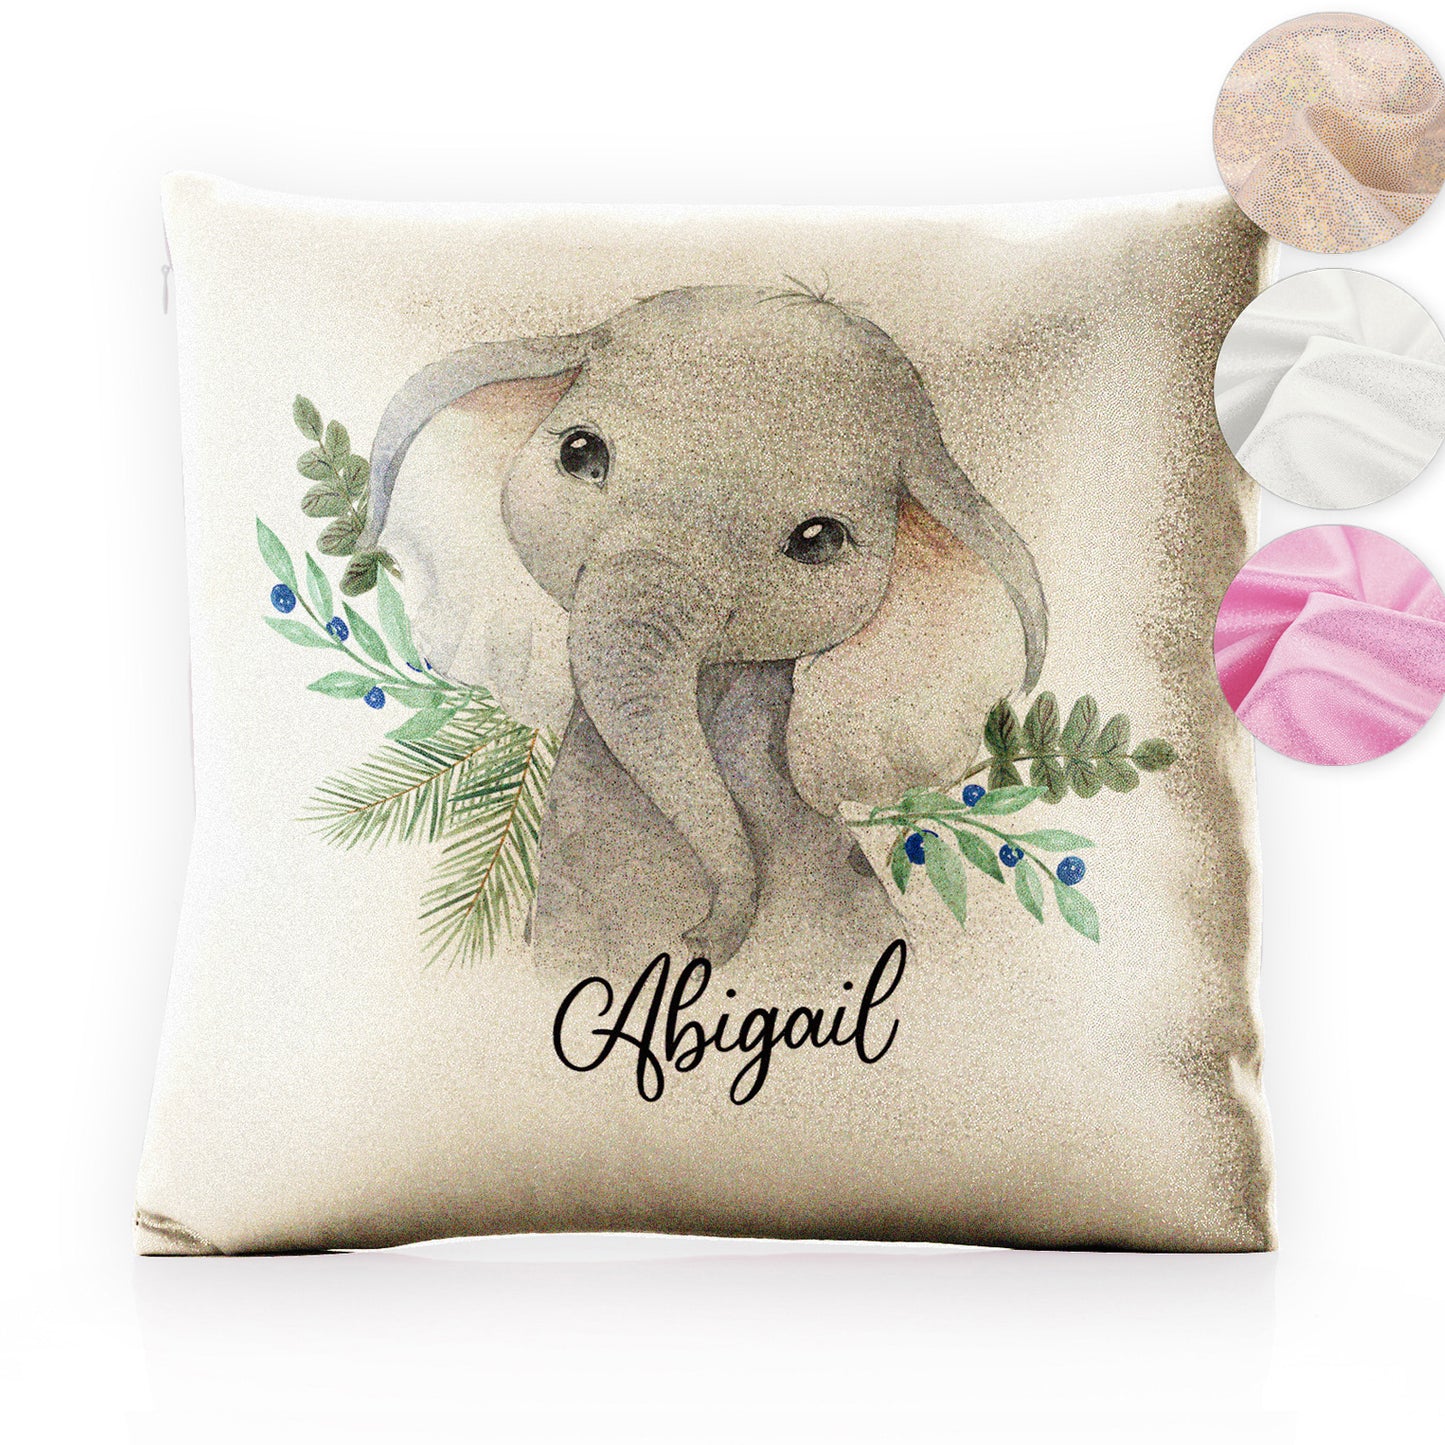 Personalised Glitter Cushion with Elephant Blue Berries and Cute Text